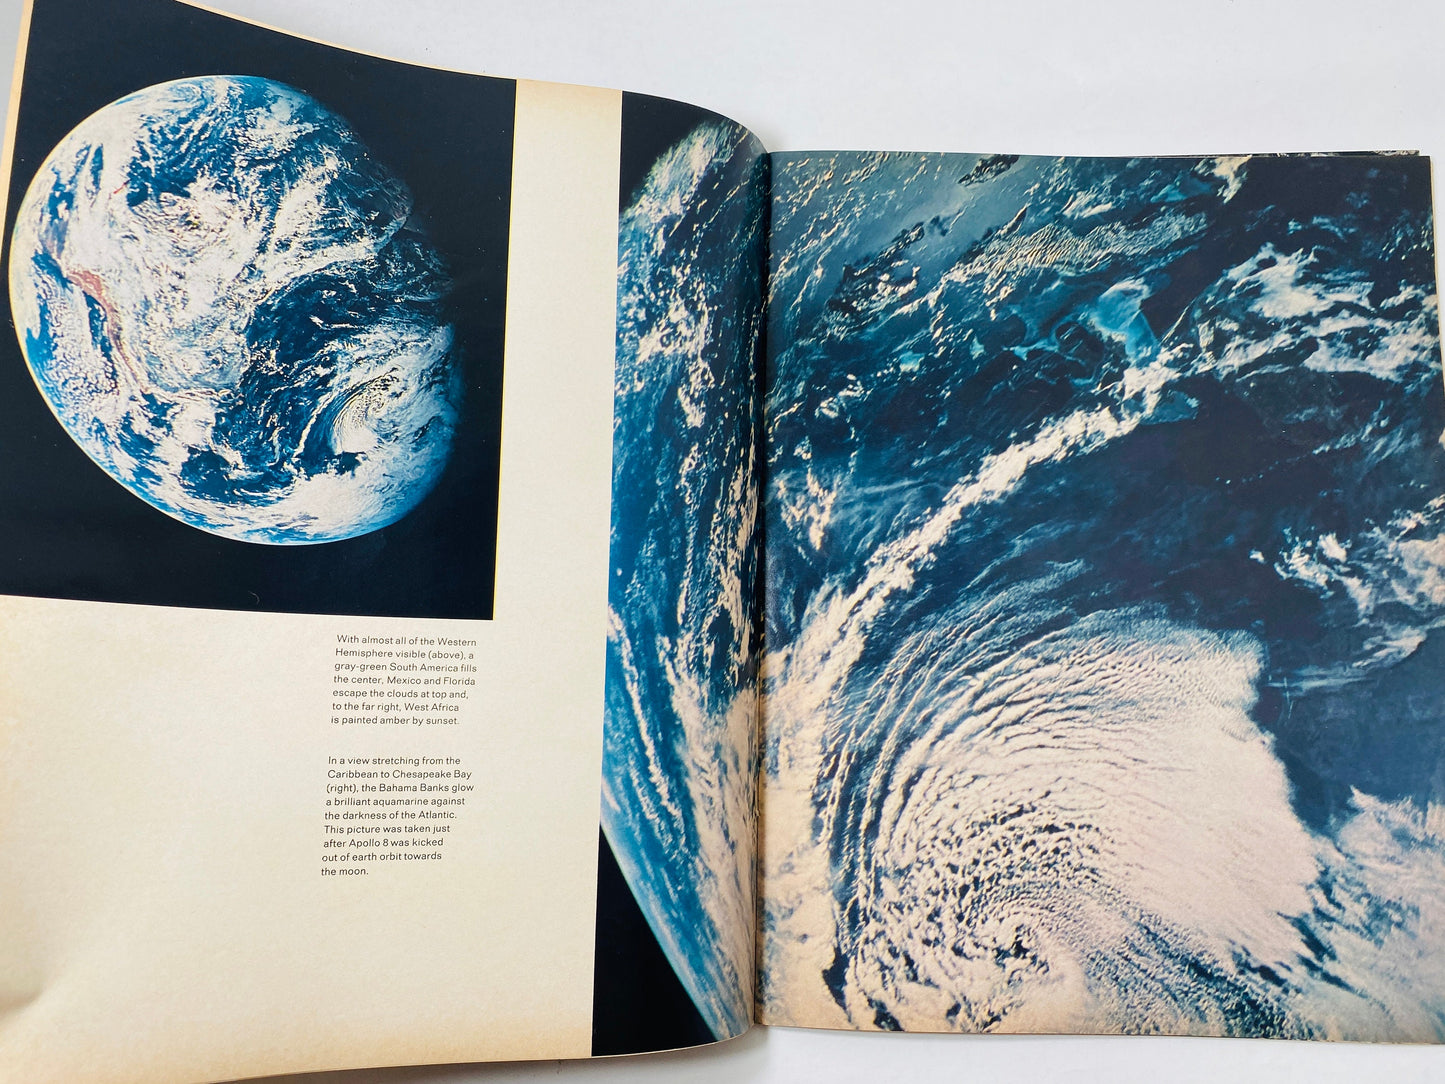 Apollo 8 vintage Look Magaine 1969 featuring the Eagle astronauts. NASA space moon landing pictures.